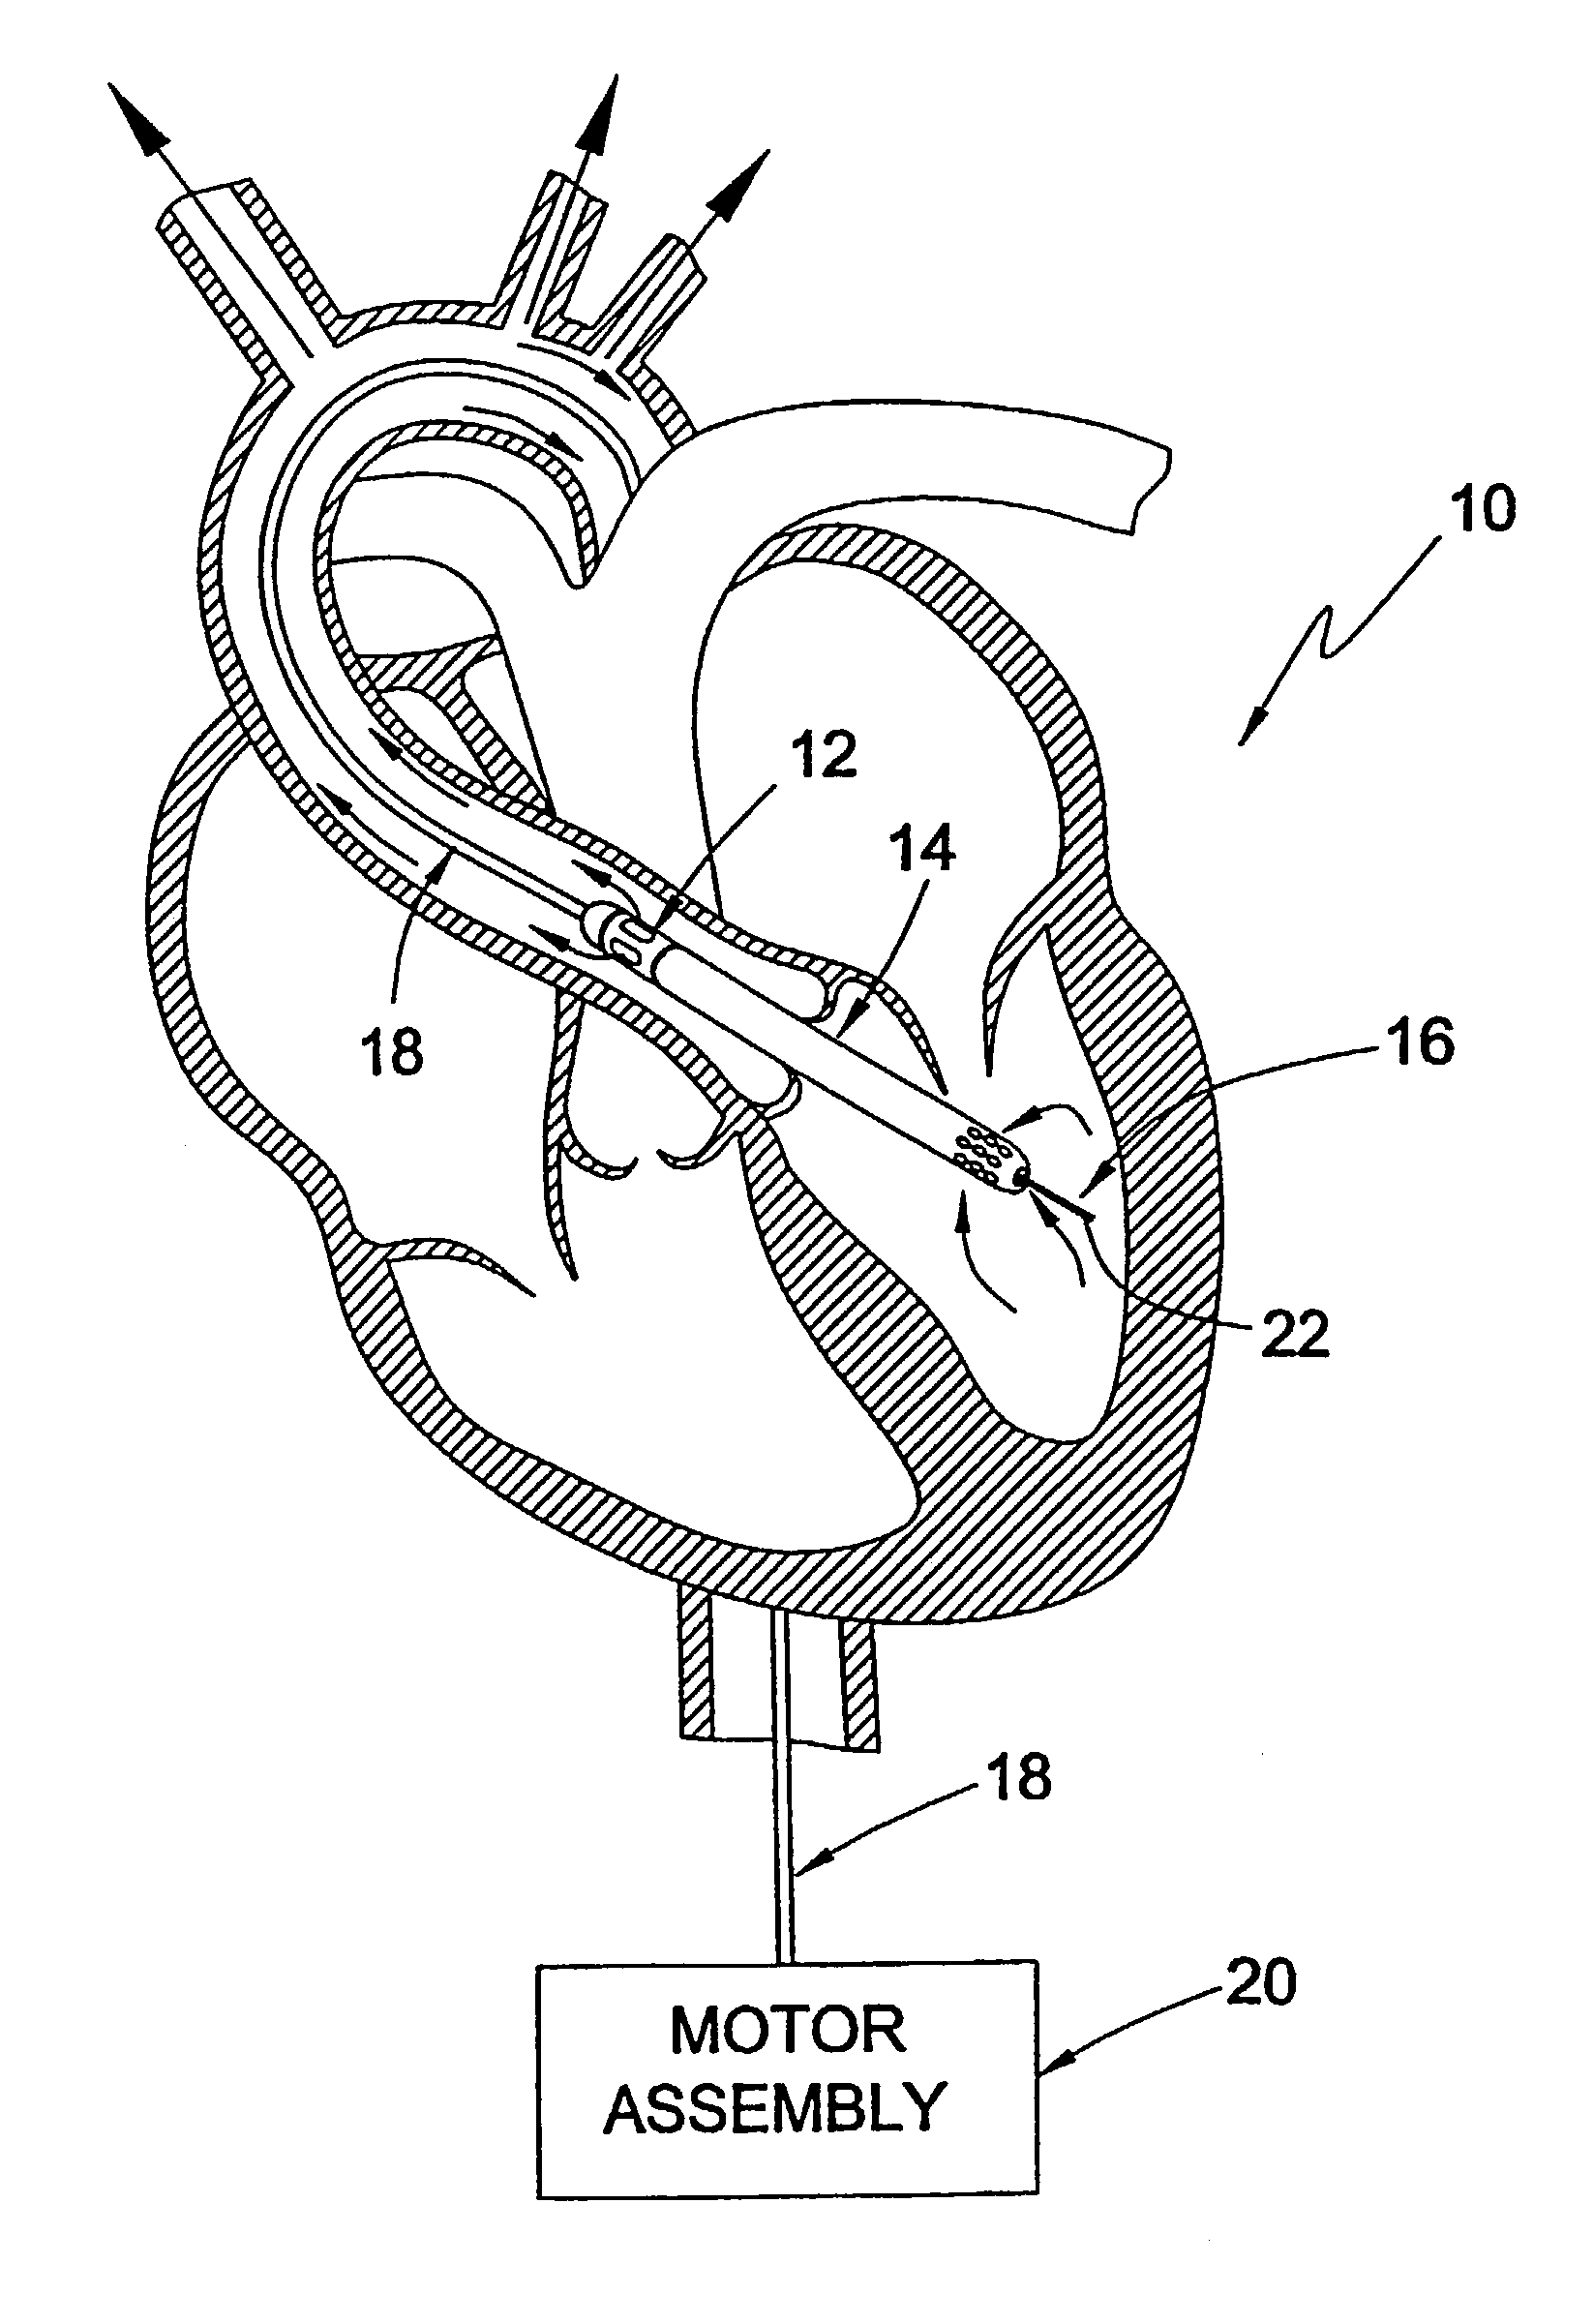 Guidable intravascular blood pump and related methods